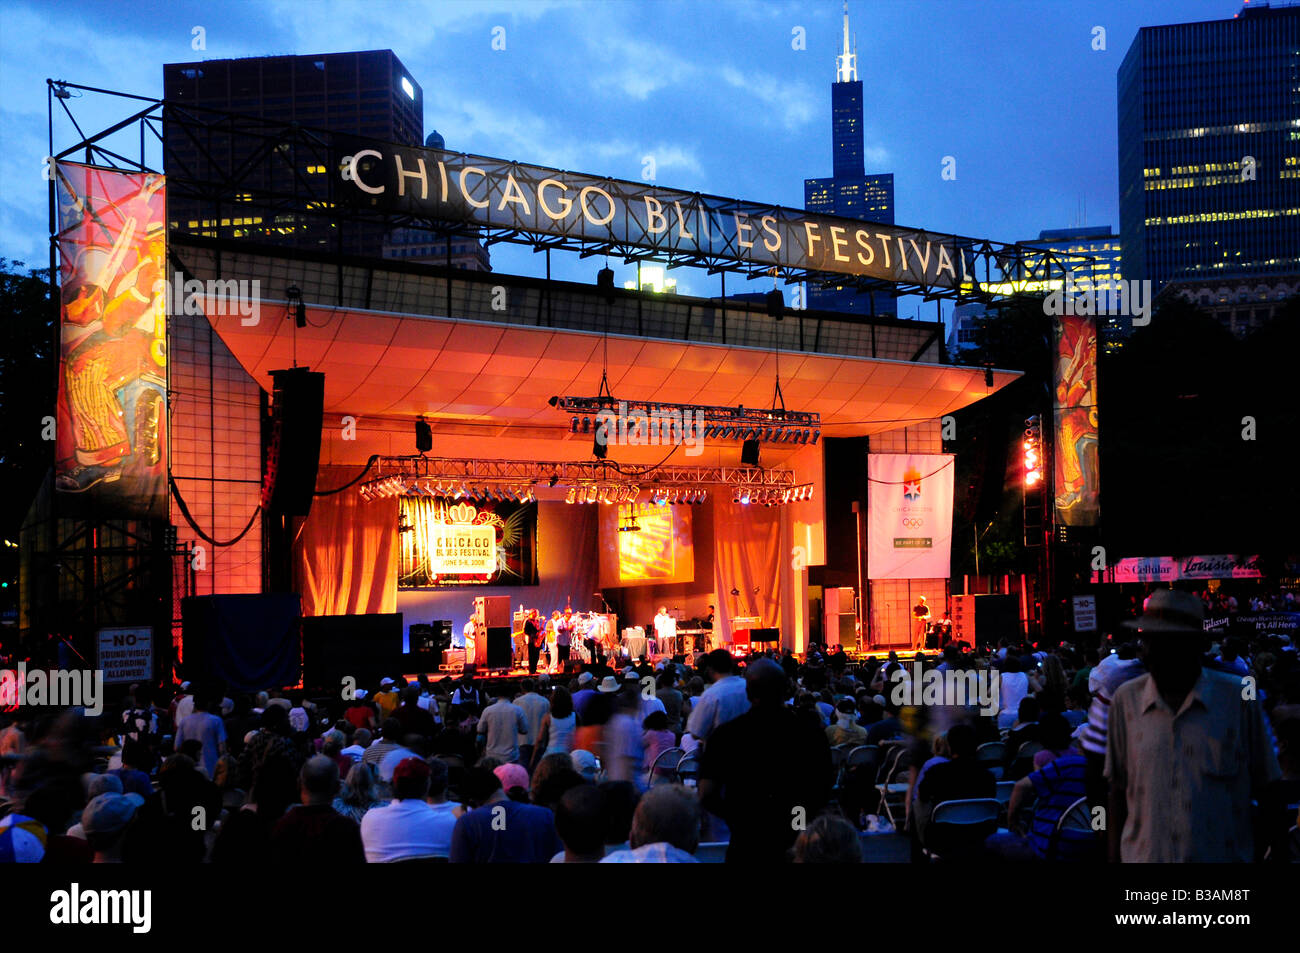 Twilight at the Chicago Blues Festival Stock Photo